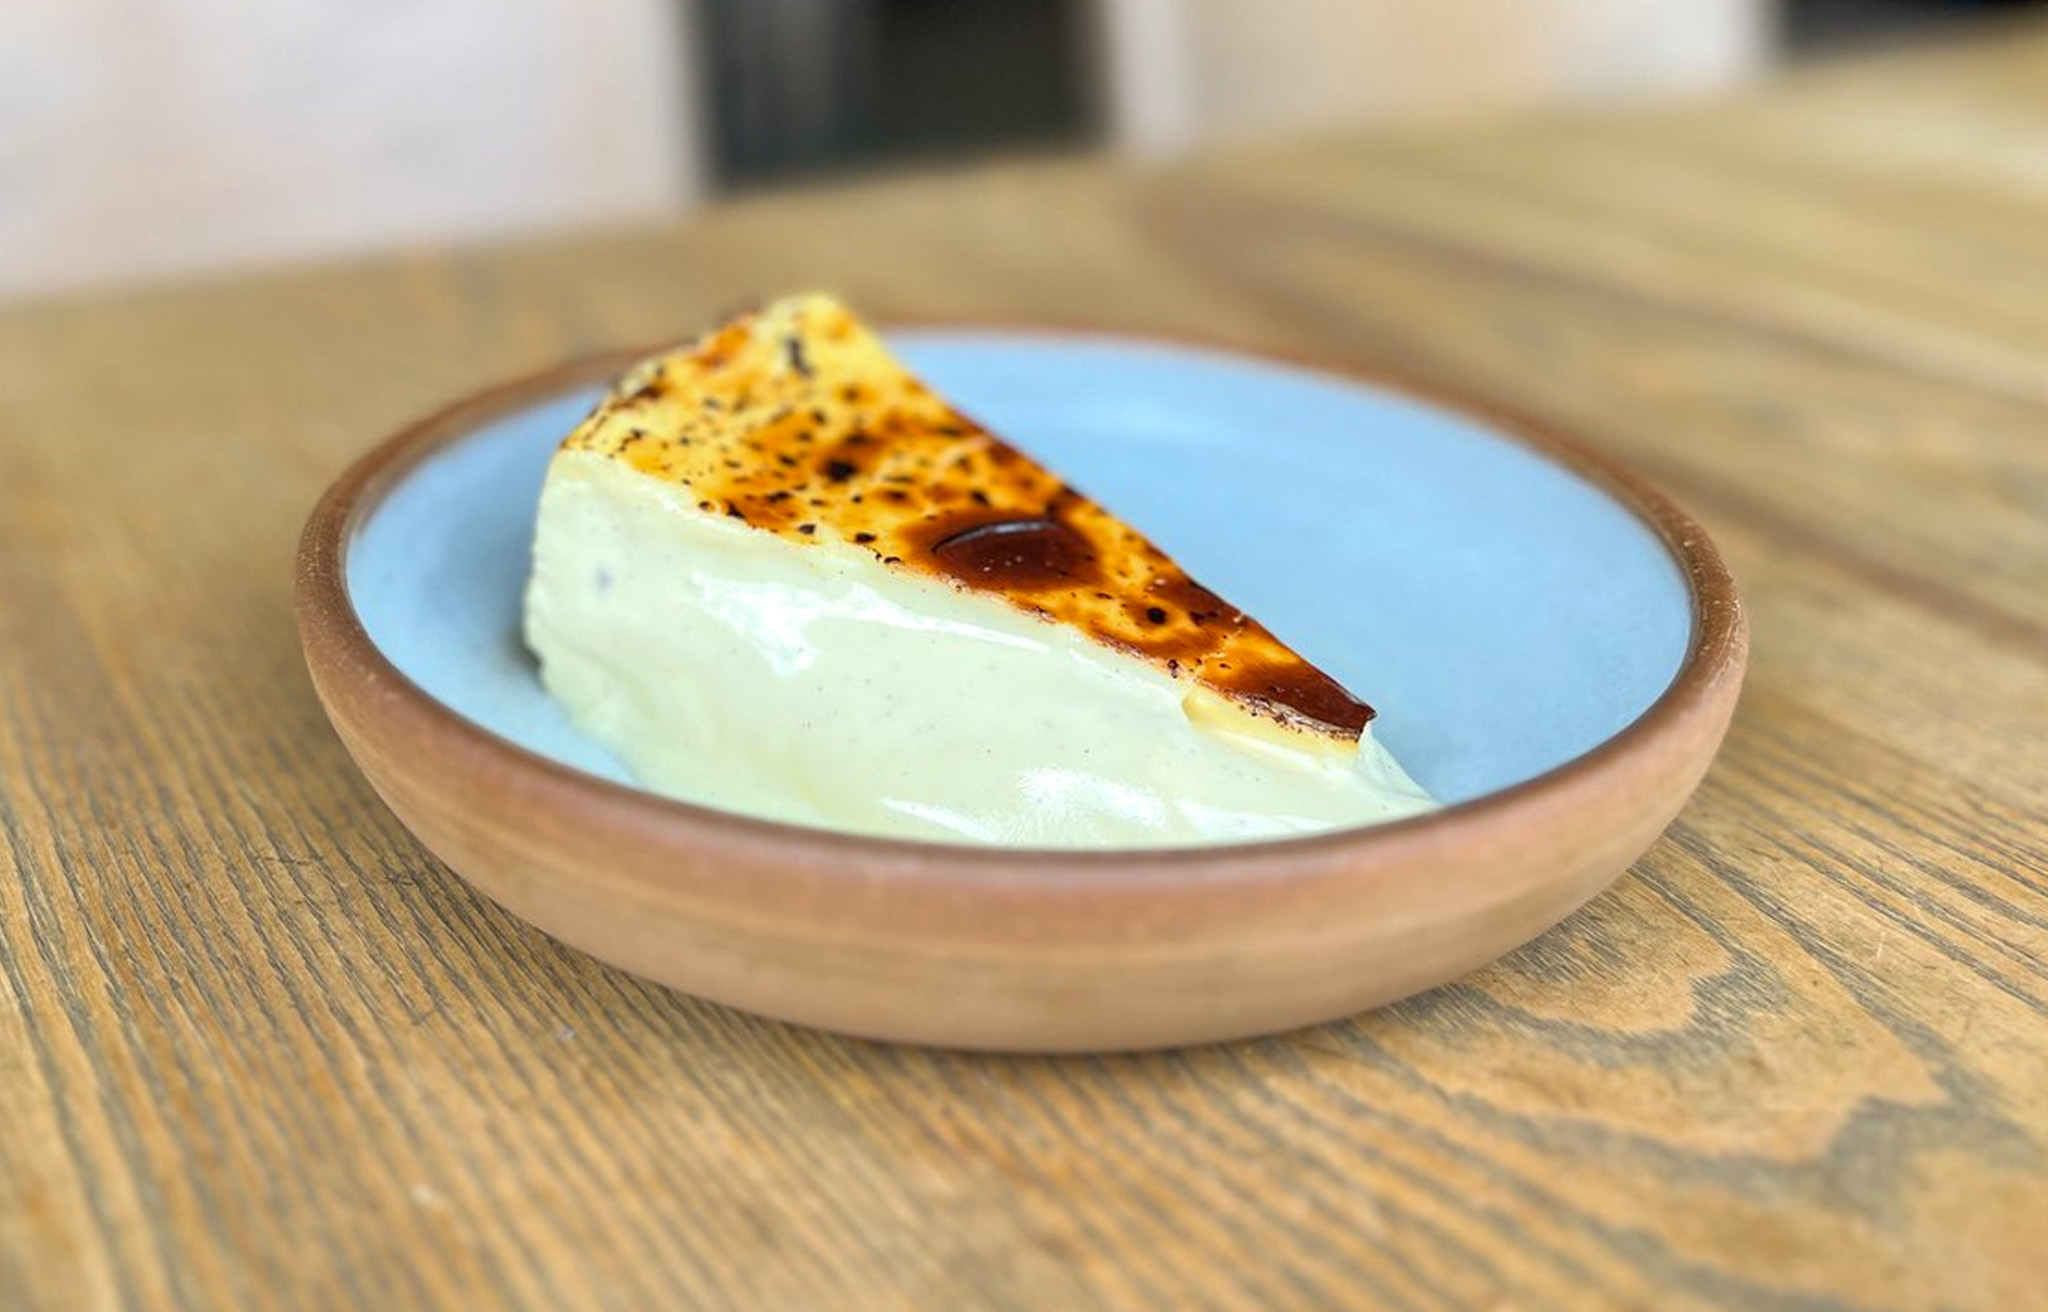 A slice of creamy cheesecake with a brûléed top on a blue plate.